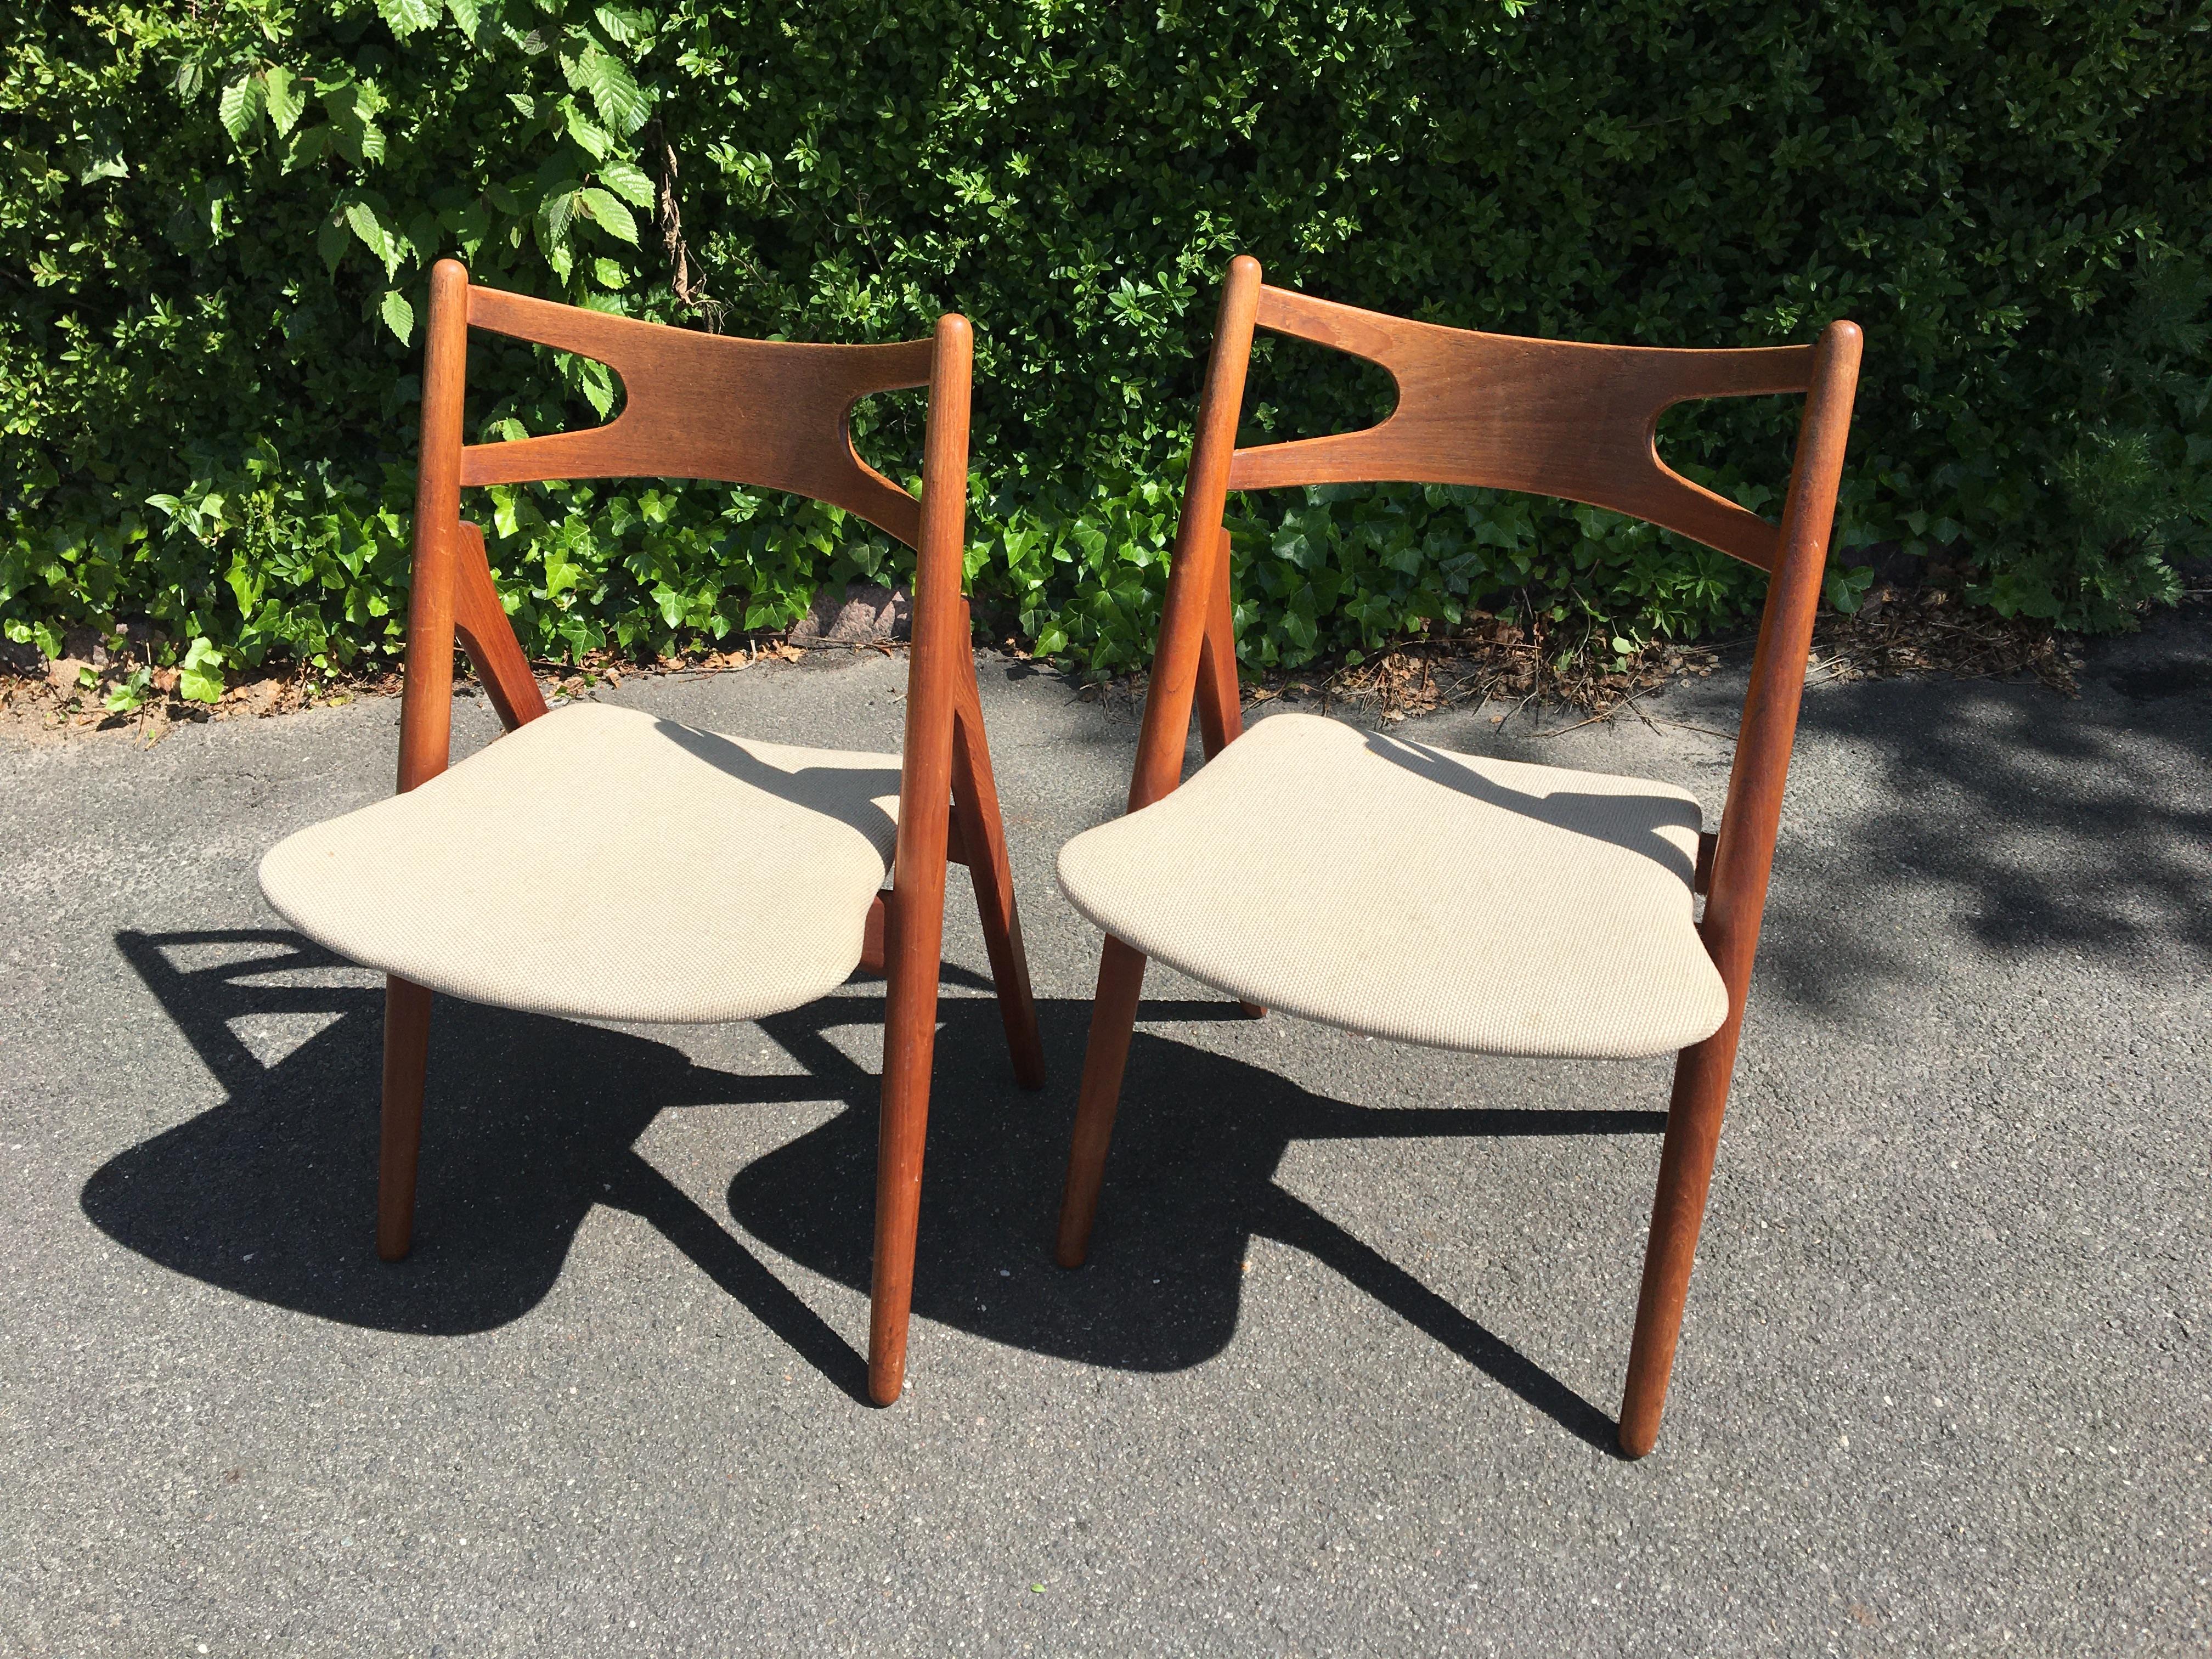 Danish dining chairs CH29 in teak design: Hans J. Wegner.
2 pcs. Teak saw chairs model CH-29 from the 1950s padded with light Hallingdal wool.
Measures: H 81, W 48, SH 42, SD 42 cm.